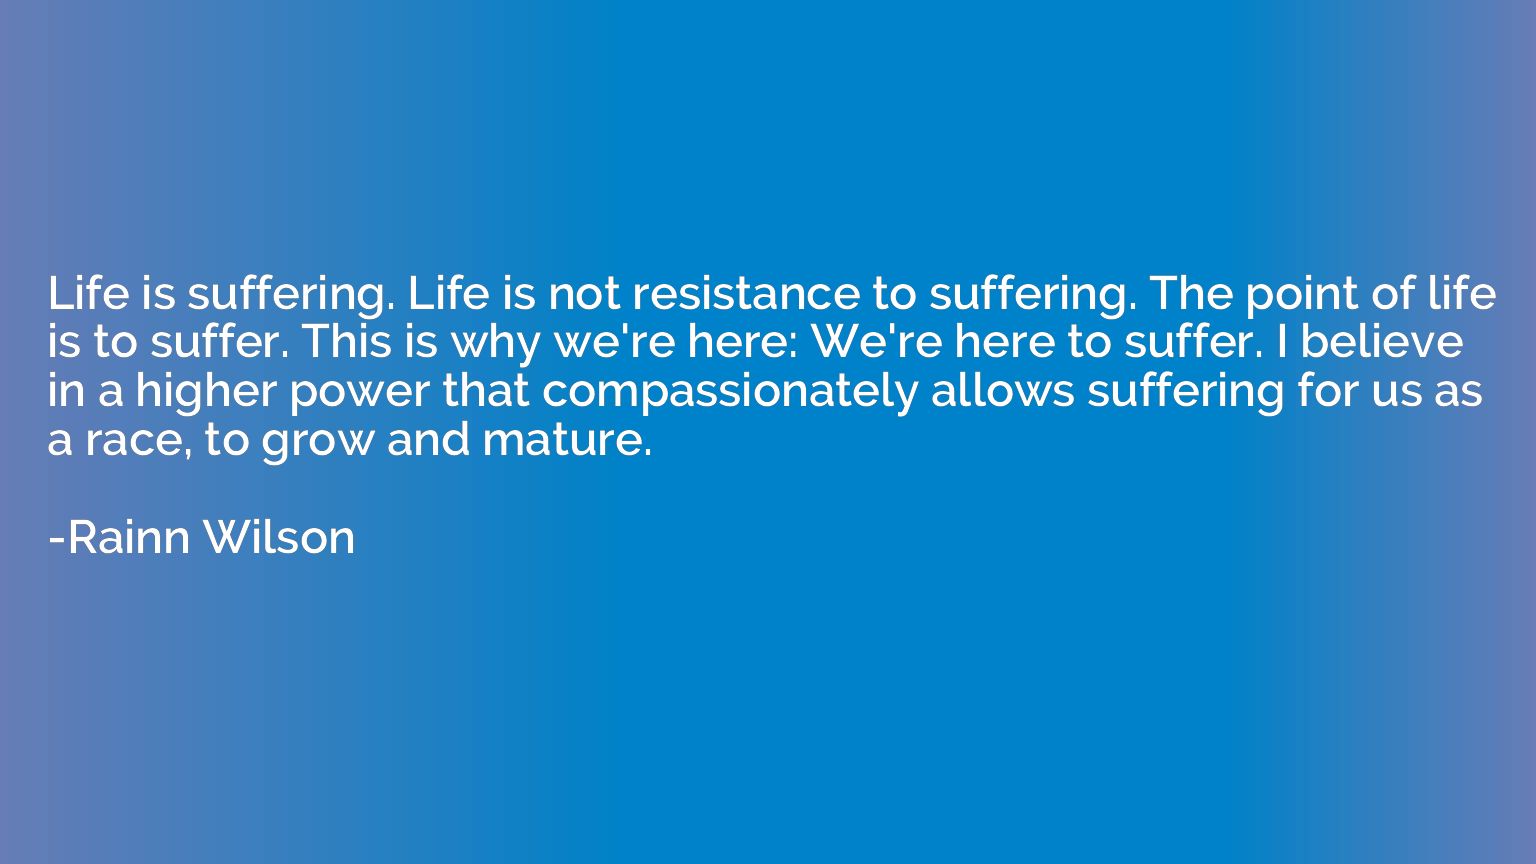 Life is suffering. Life is not resistance to suffering. The 